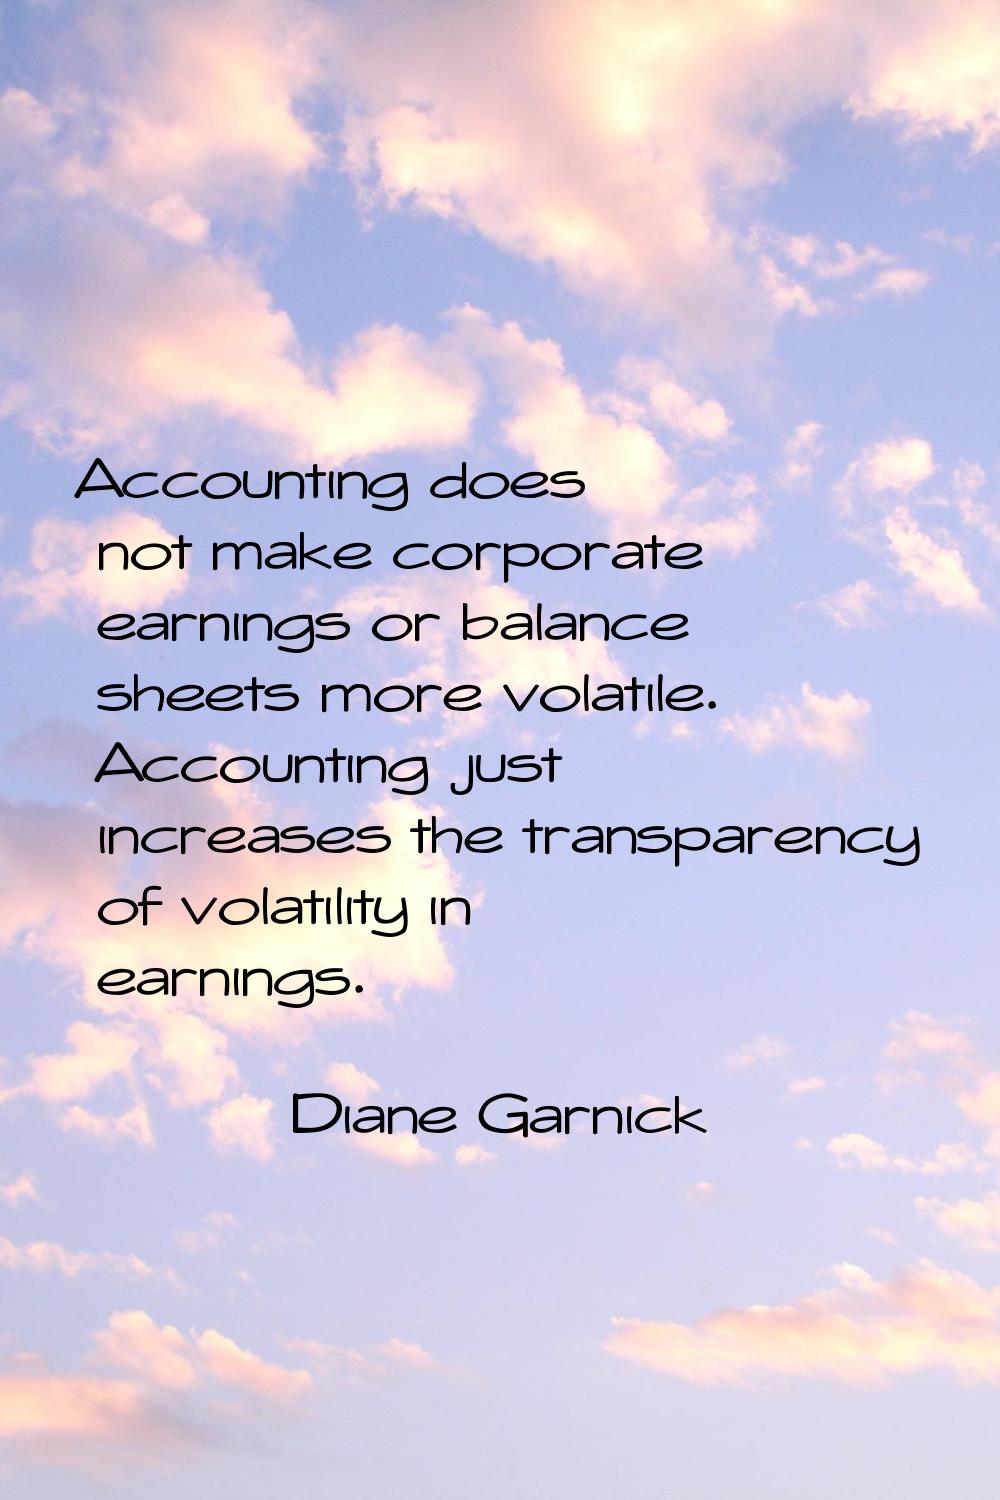 Accounting does not make corporate earnings or balance sheets more volatile. Accounting just increa